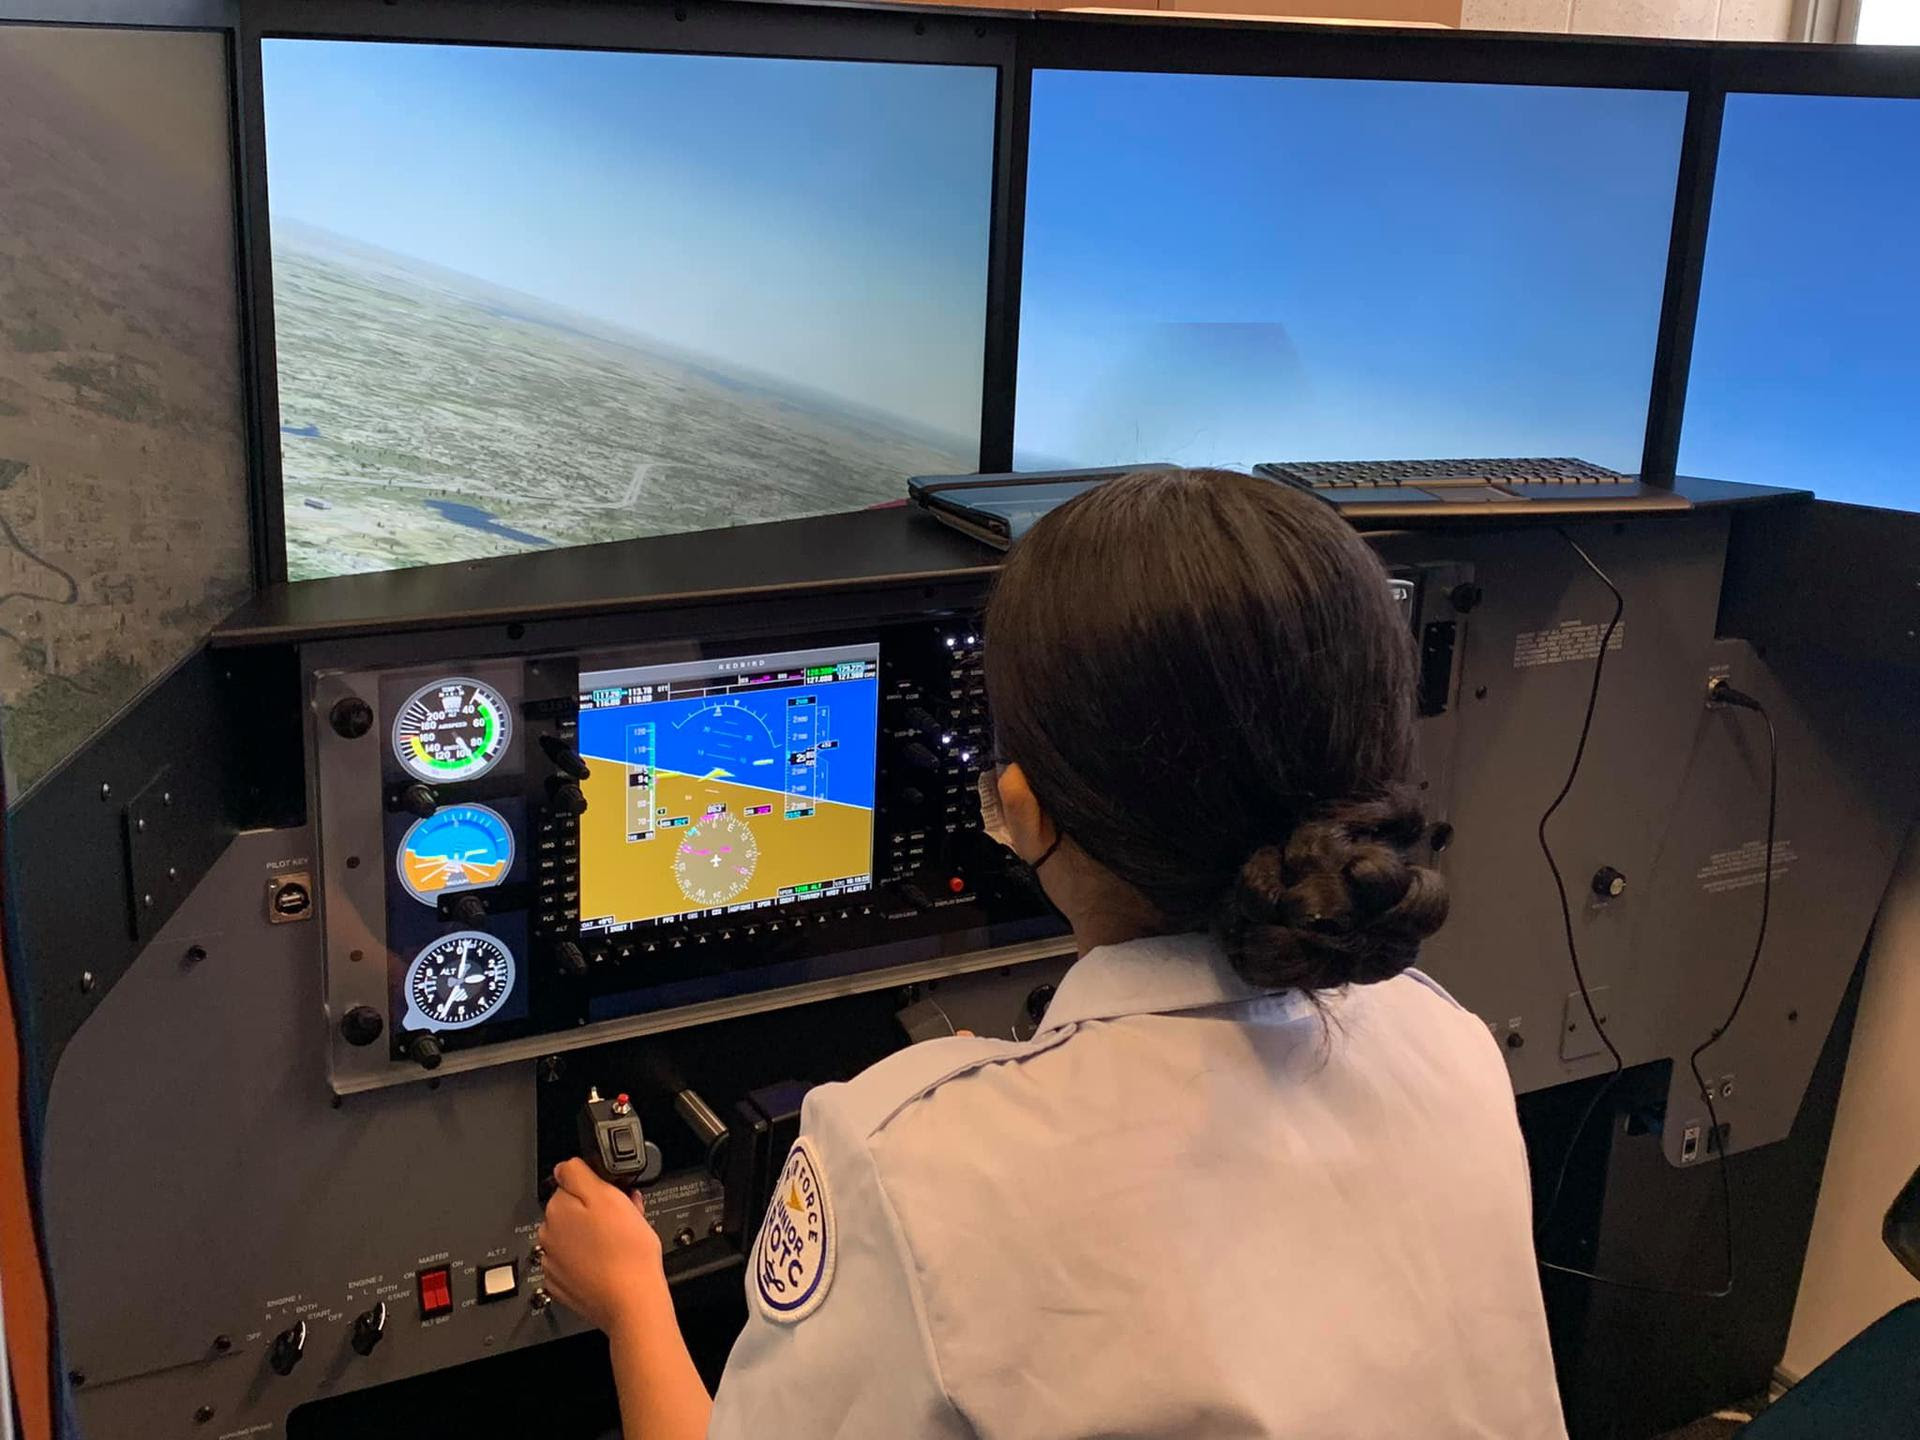 ETA Students Will Receive Training on a State-of-the-Art Simulator